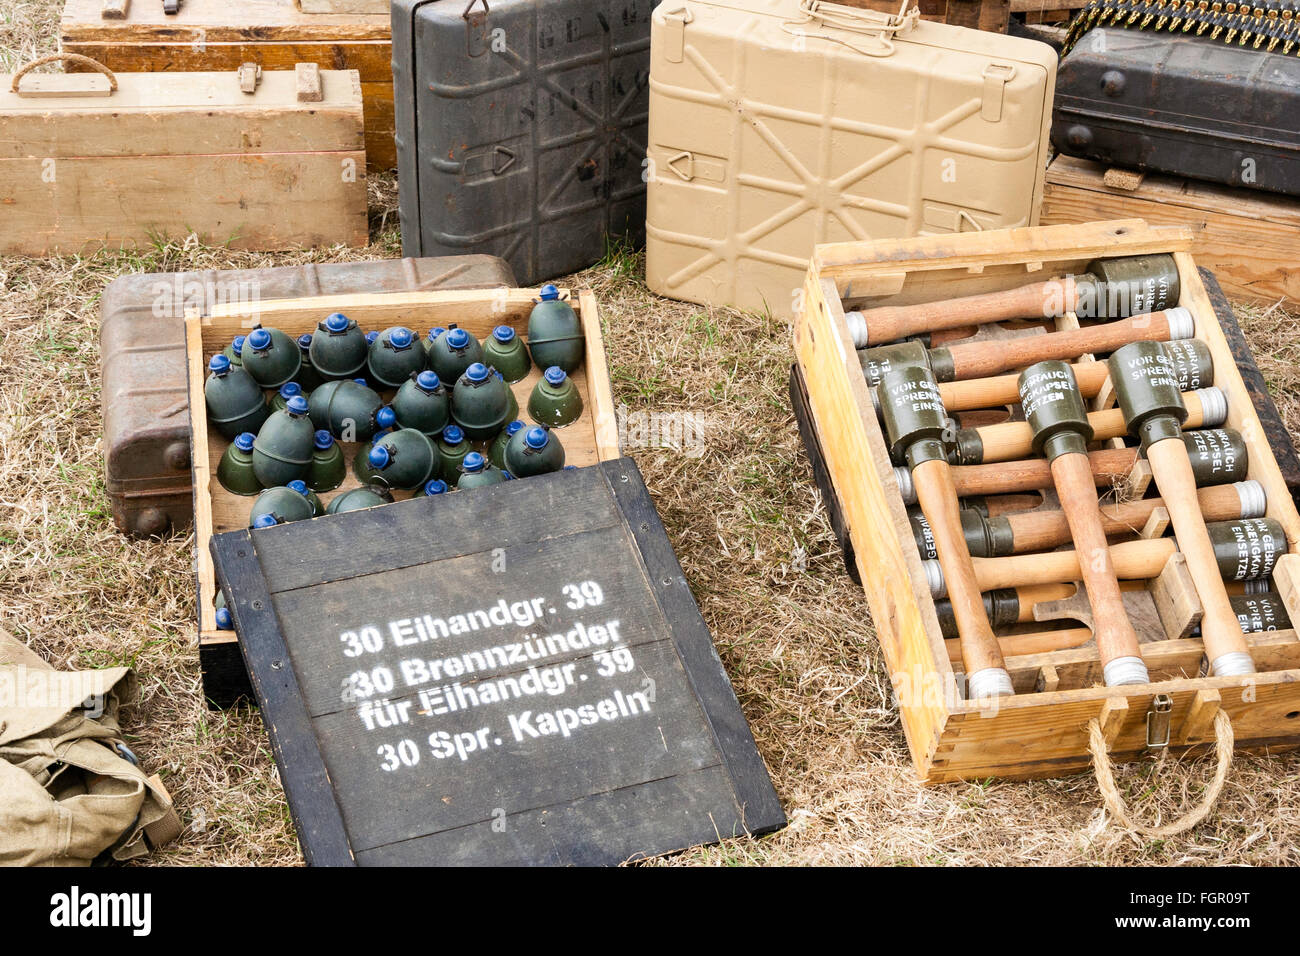 Second World War re-enactment. Box of German stielhandgranate, stick grenades and crate of M39 Egg-Shaped Grenades with blue fuse tops. Stock Photo